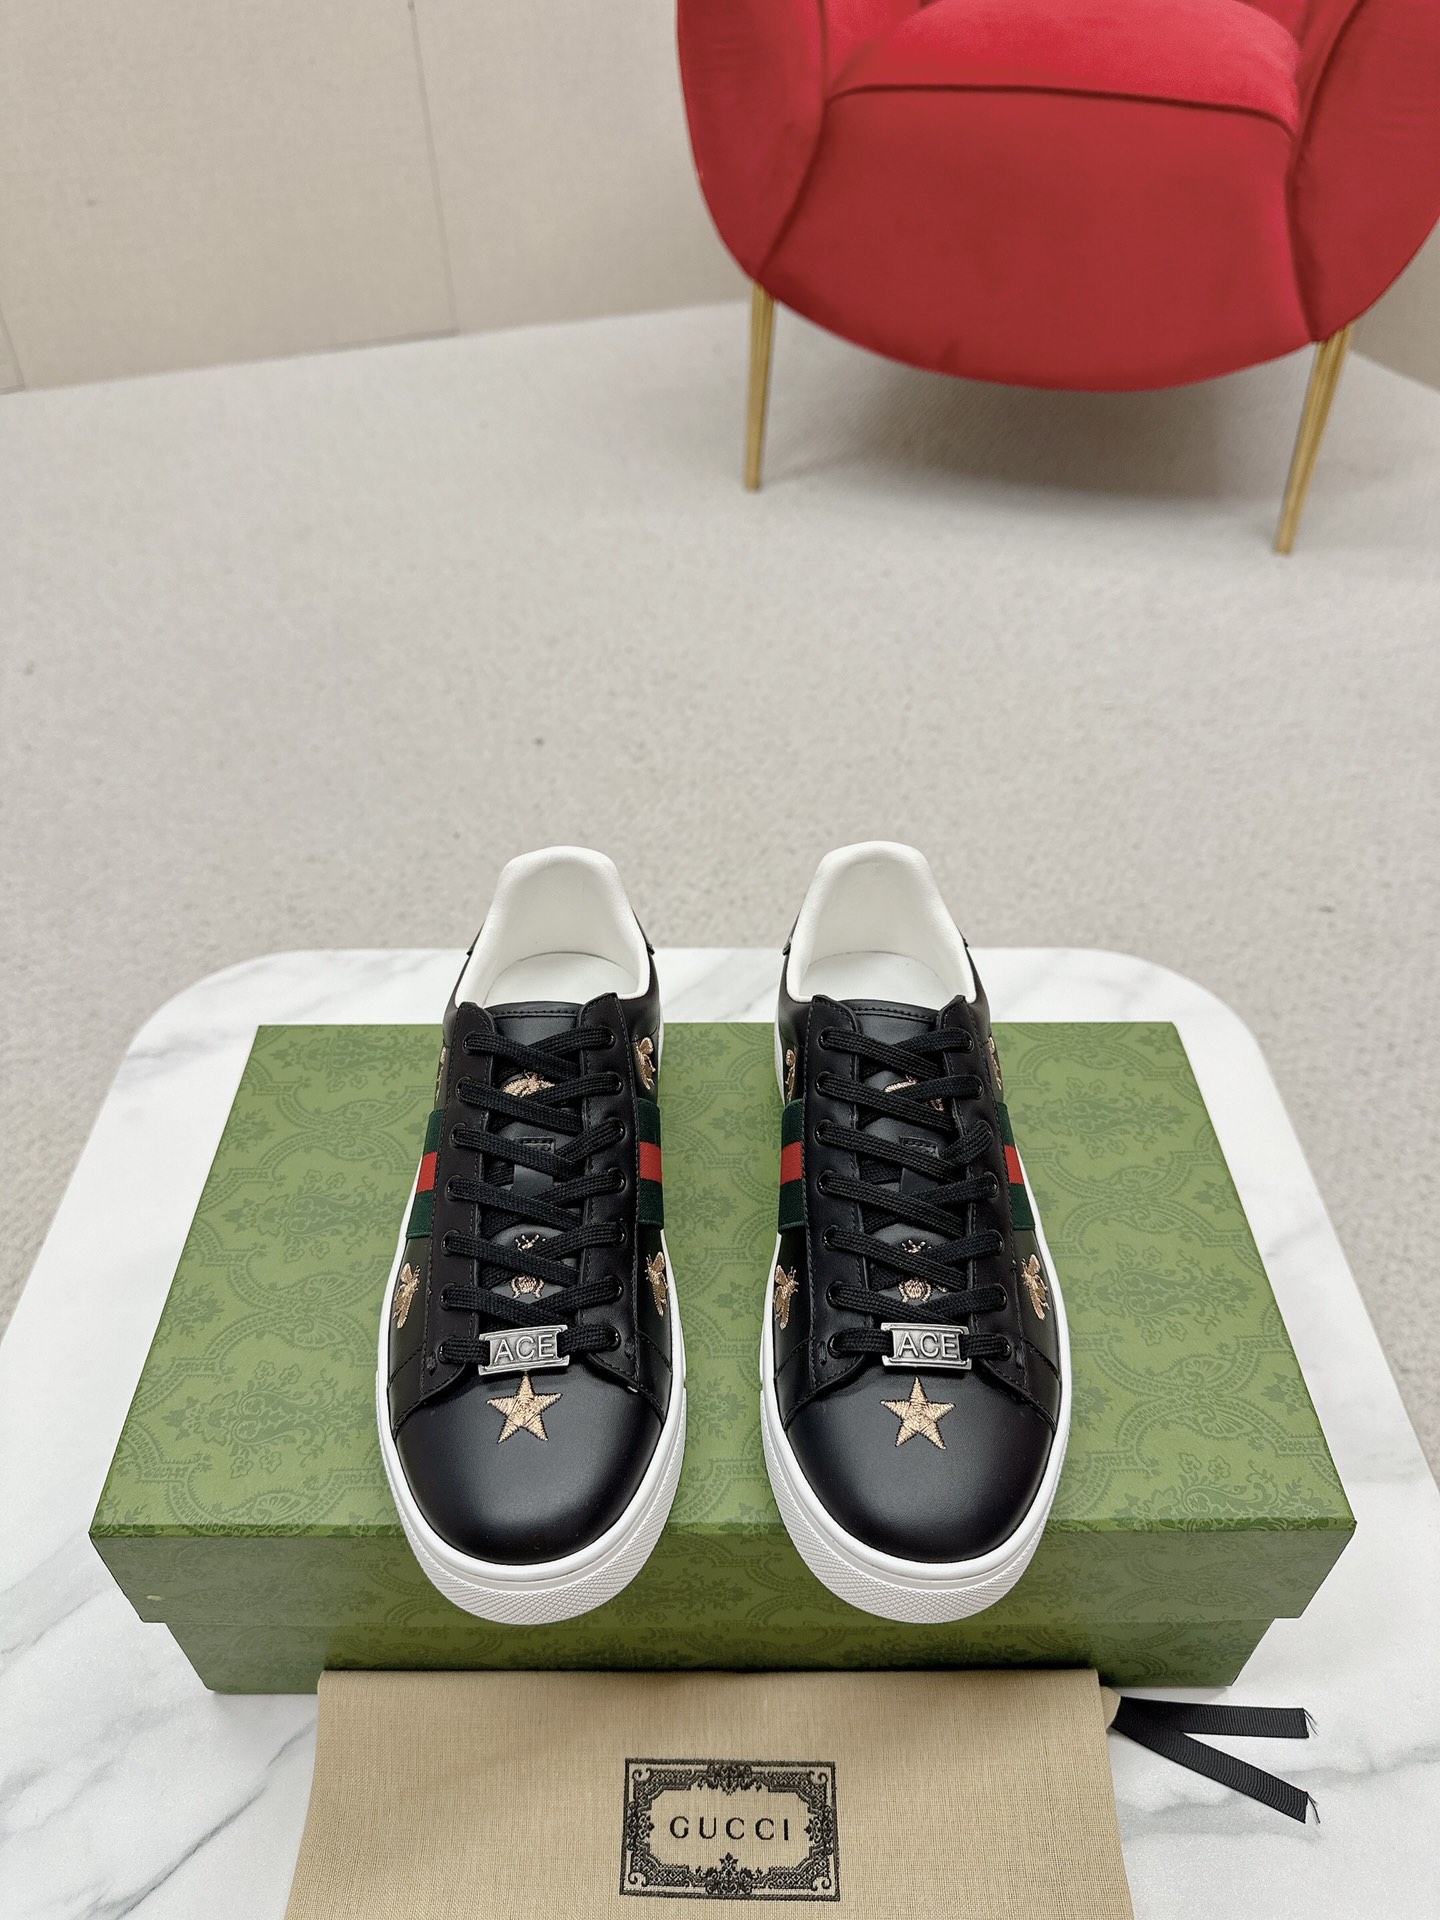 Gucci Skateboard Shoes Sneakers Best Replica Quality
 White Embroidery Unisex Women Men Cowhide Rubber Casual